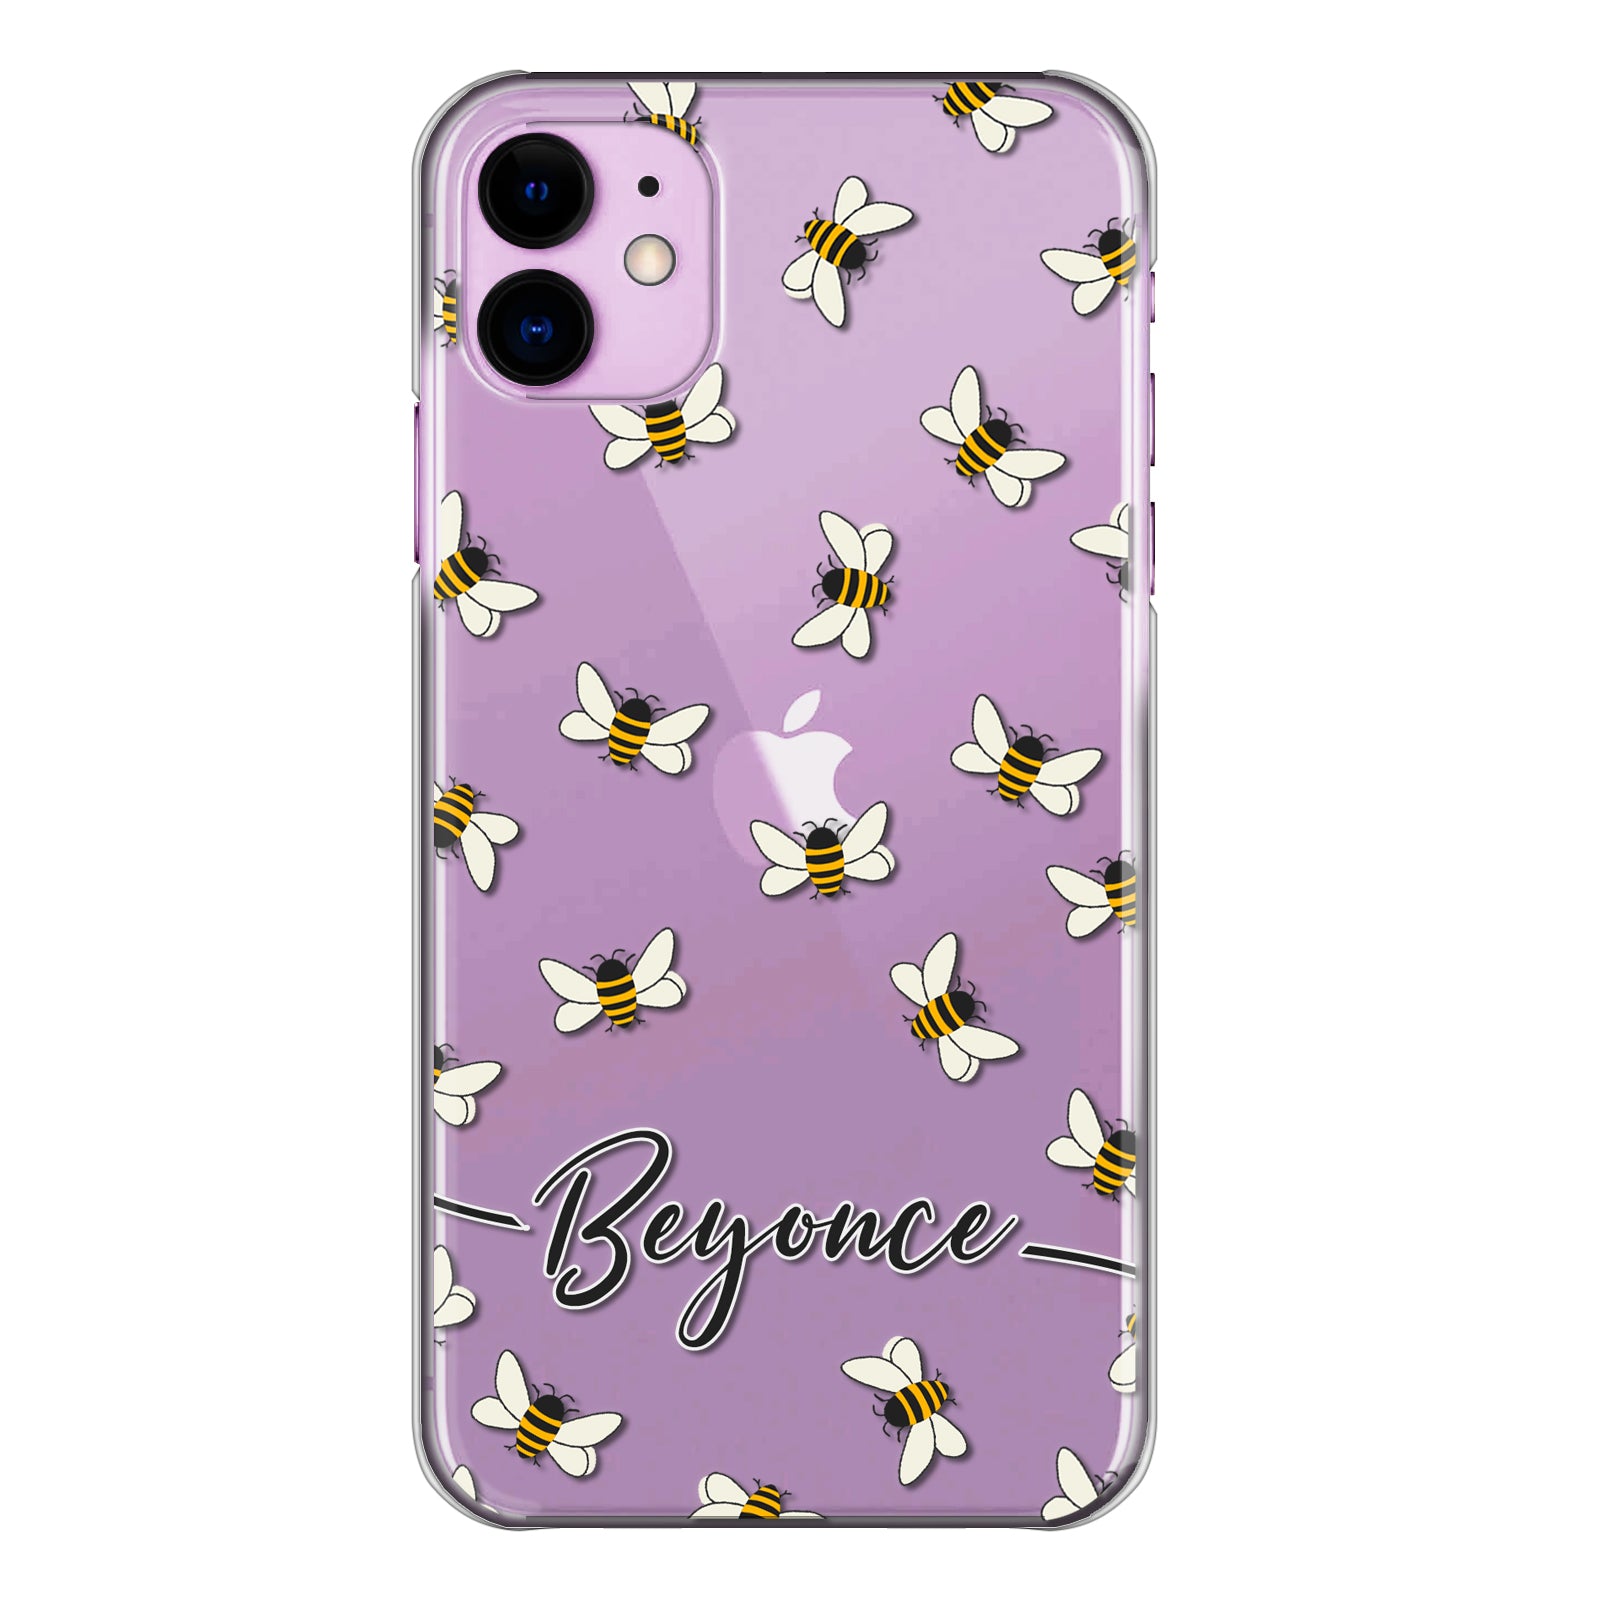 Personalised Motorola Phone Hard Case with Honeybees and White Outlined Text